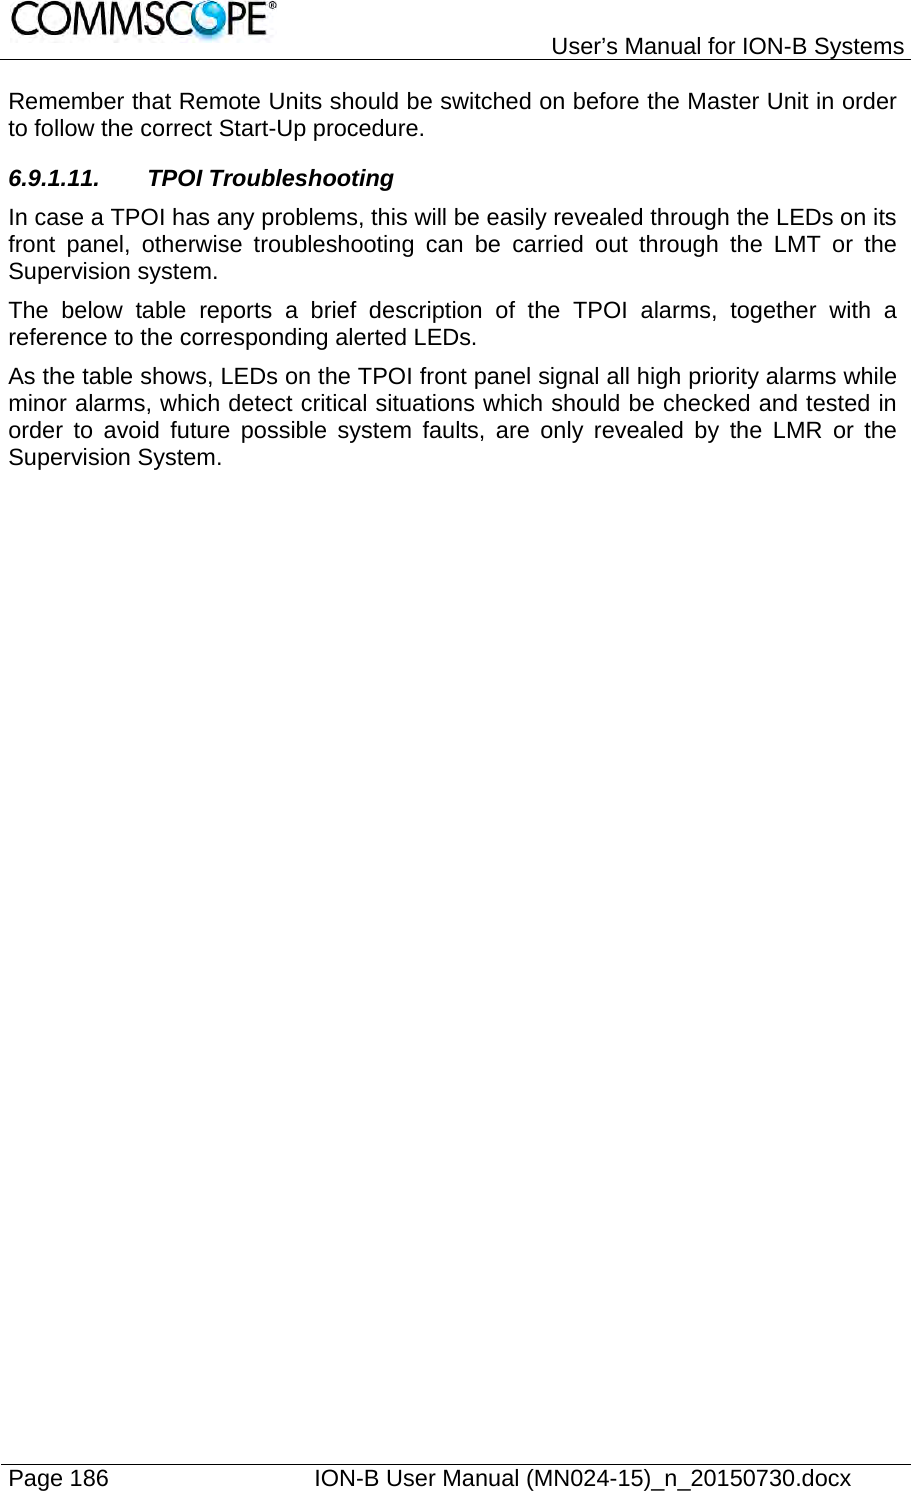   User’s Manual for ION-B Systems Page 186    ION-B User Manual (MN024-15)_n_20150730.docx  Remember that Remote Units should be switched on before the Master Unit in order to follow the correct Start-Up procedure. 6.9.1.11. TPOI Troubleshooting In case a TPOI has any problems, this will be easily revealed through the LEDs on its front panel, otherwise troubleshooting can be carried out through the LMT or the Supervision system. The below table reports a brief description of the TPOI alarms, together with a reference to the corresponding alerted LEDs. As the table shows, LEDs on the TPOI front panel signal all high priority alarms while minor alarms, which detect critical situations which should be checked and tested in order to avoid future possible system faults, are only revealed by the LMR or the Supervision System.   